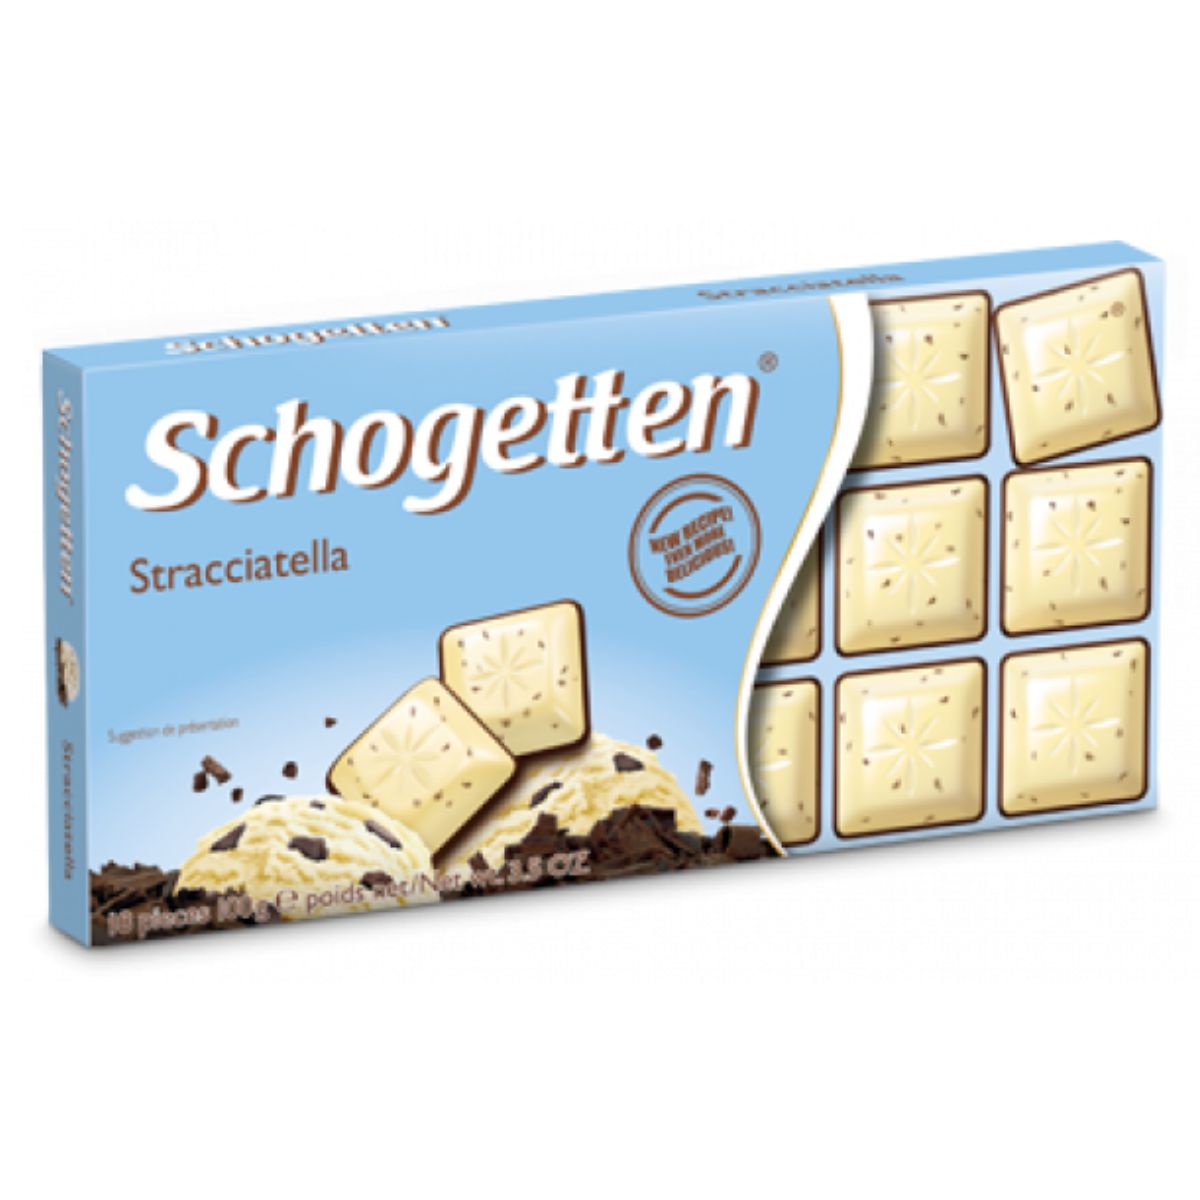 A box of Schogetten - White Chocolate with Pieces of Roasted Crushed Cocoa Beans and Dark Chocolate - 100g, featuring a close-up of the individually segmented white chocolate squares with chocolate flakes, offering a unique flavor experience.